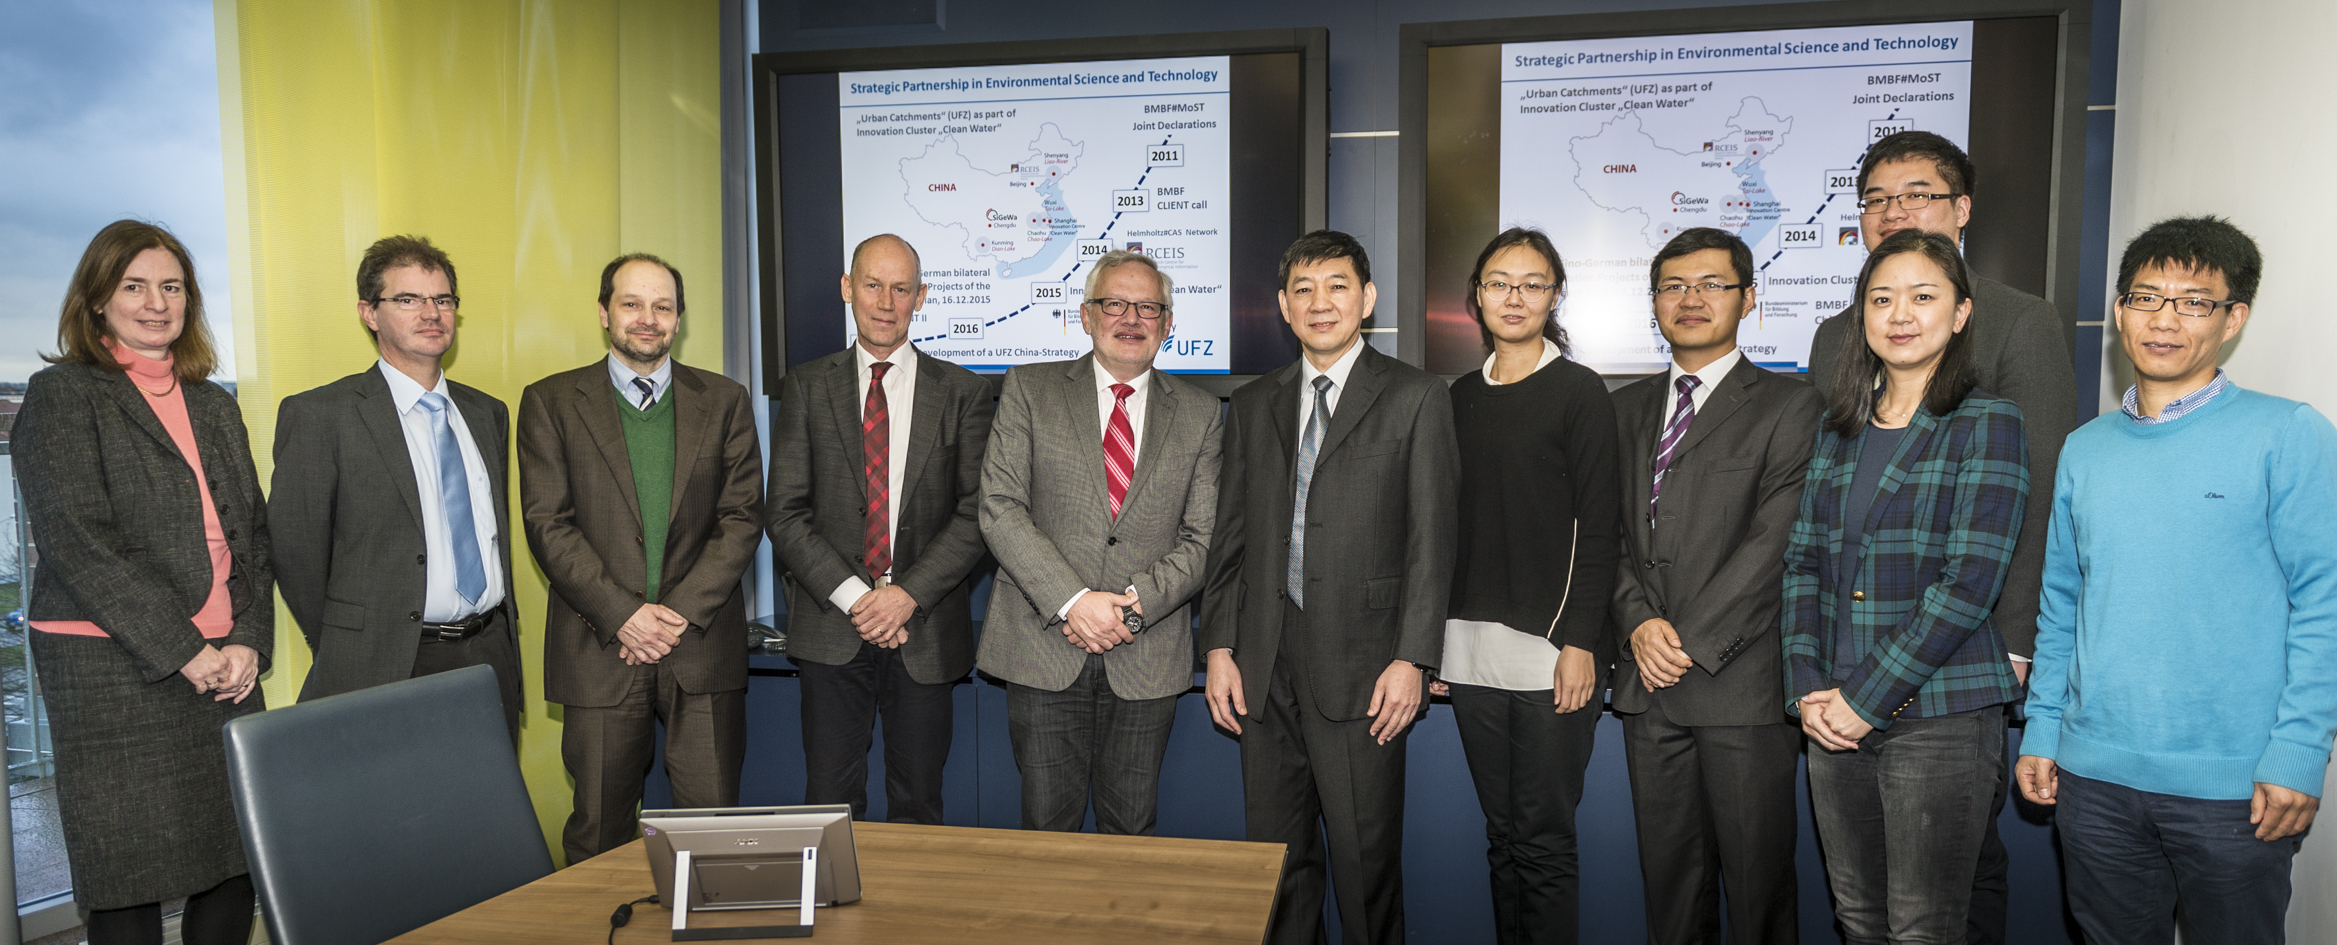 Delegation visit of the Ministry of Science and Technology (Mr. YANG, Deputy General Director) to discuss strategic cooperation between China and Germany in environmental science and technology, Leipzig, 13.01.2016